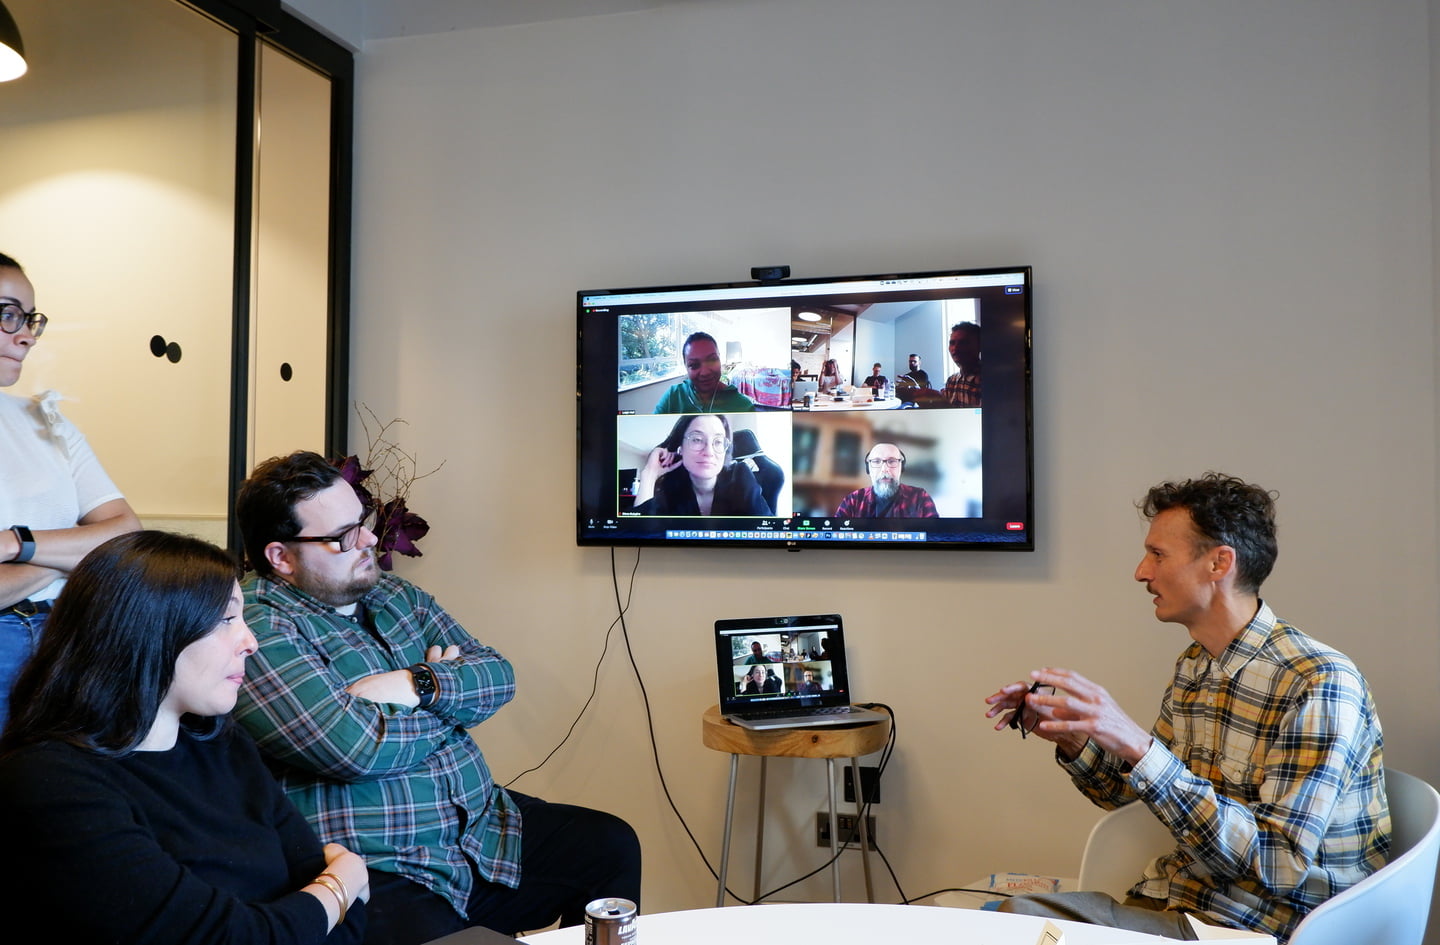 An Inviqa expert wearing a checkered shirt talks and gestures with his hands to people in a meeting room and remote people, visible on a wall-mounted TV